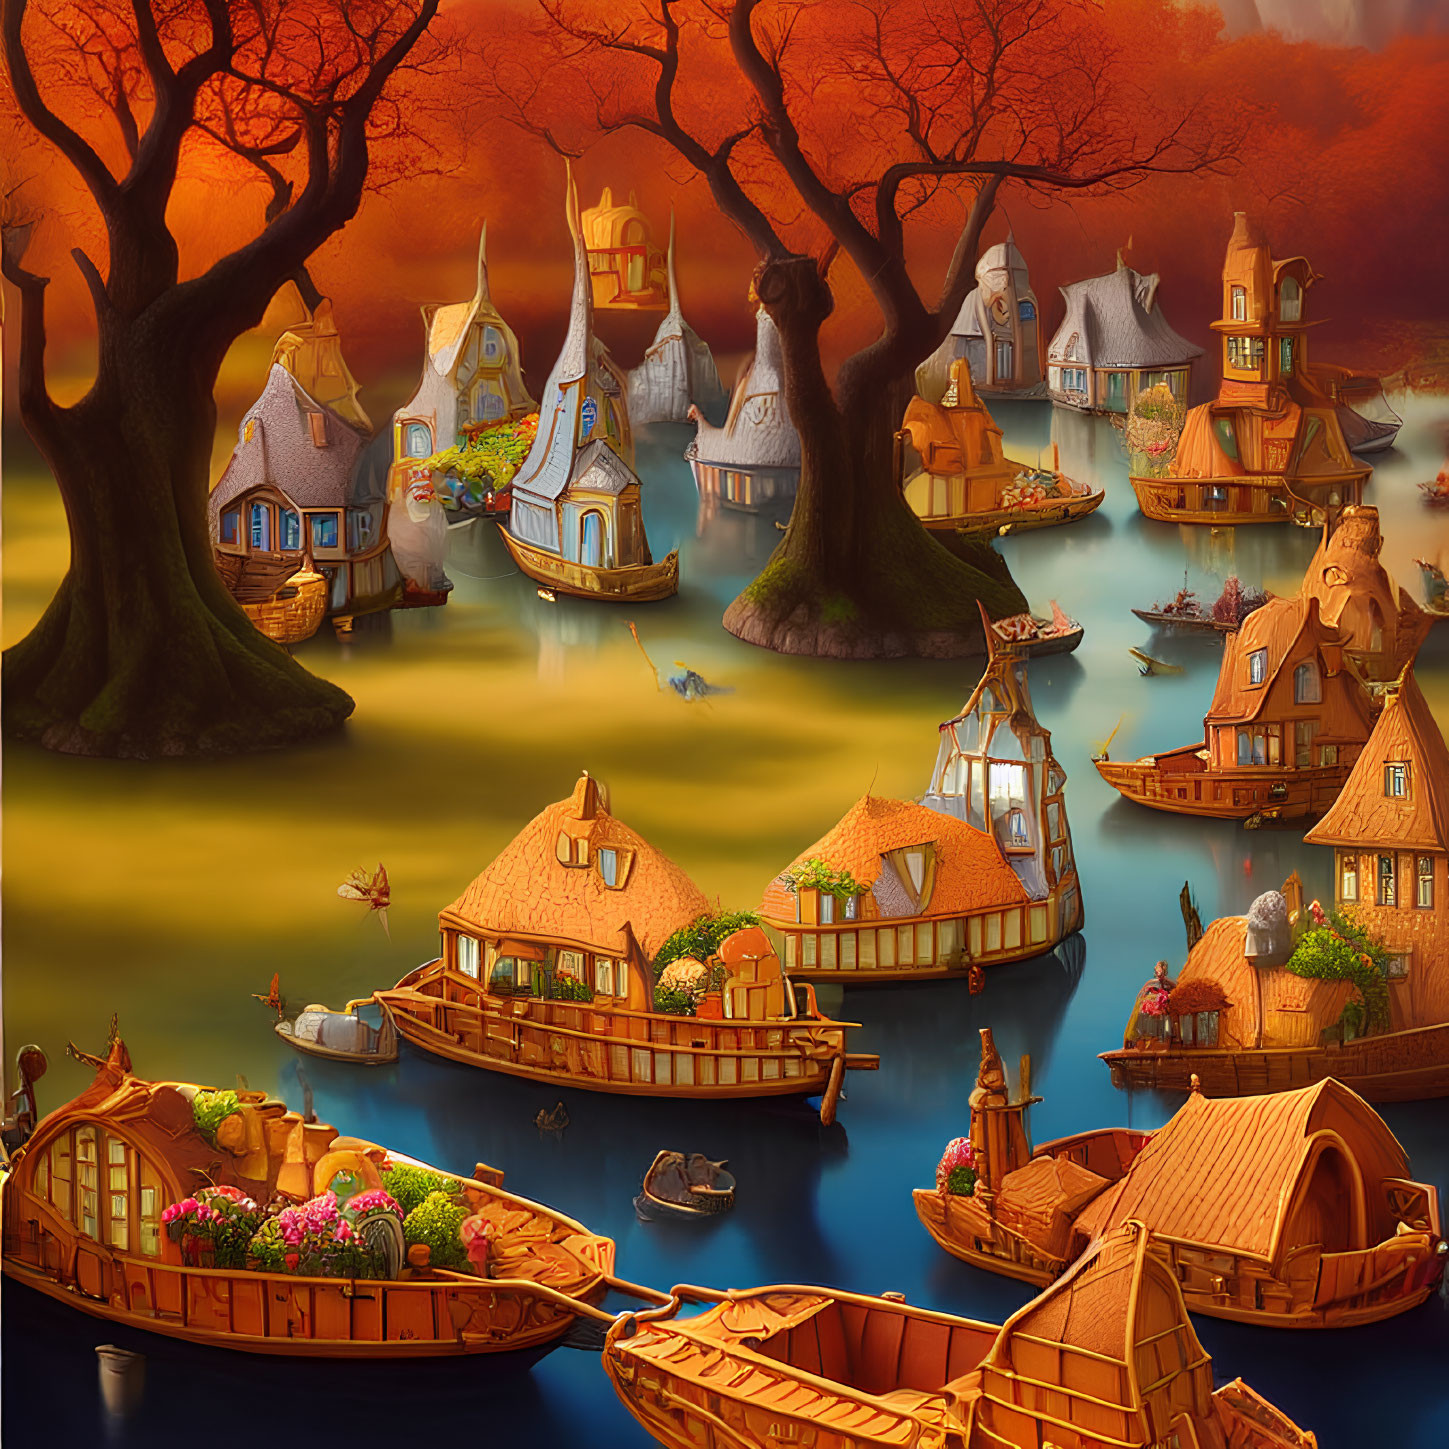 Autumnal village with cozy houses by calm waters & orange sky